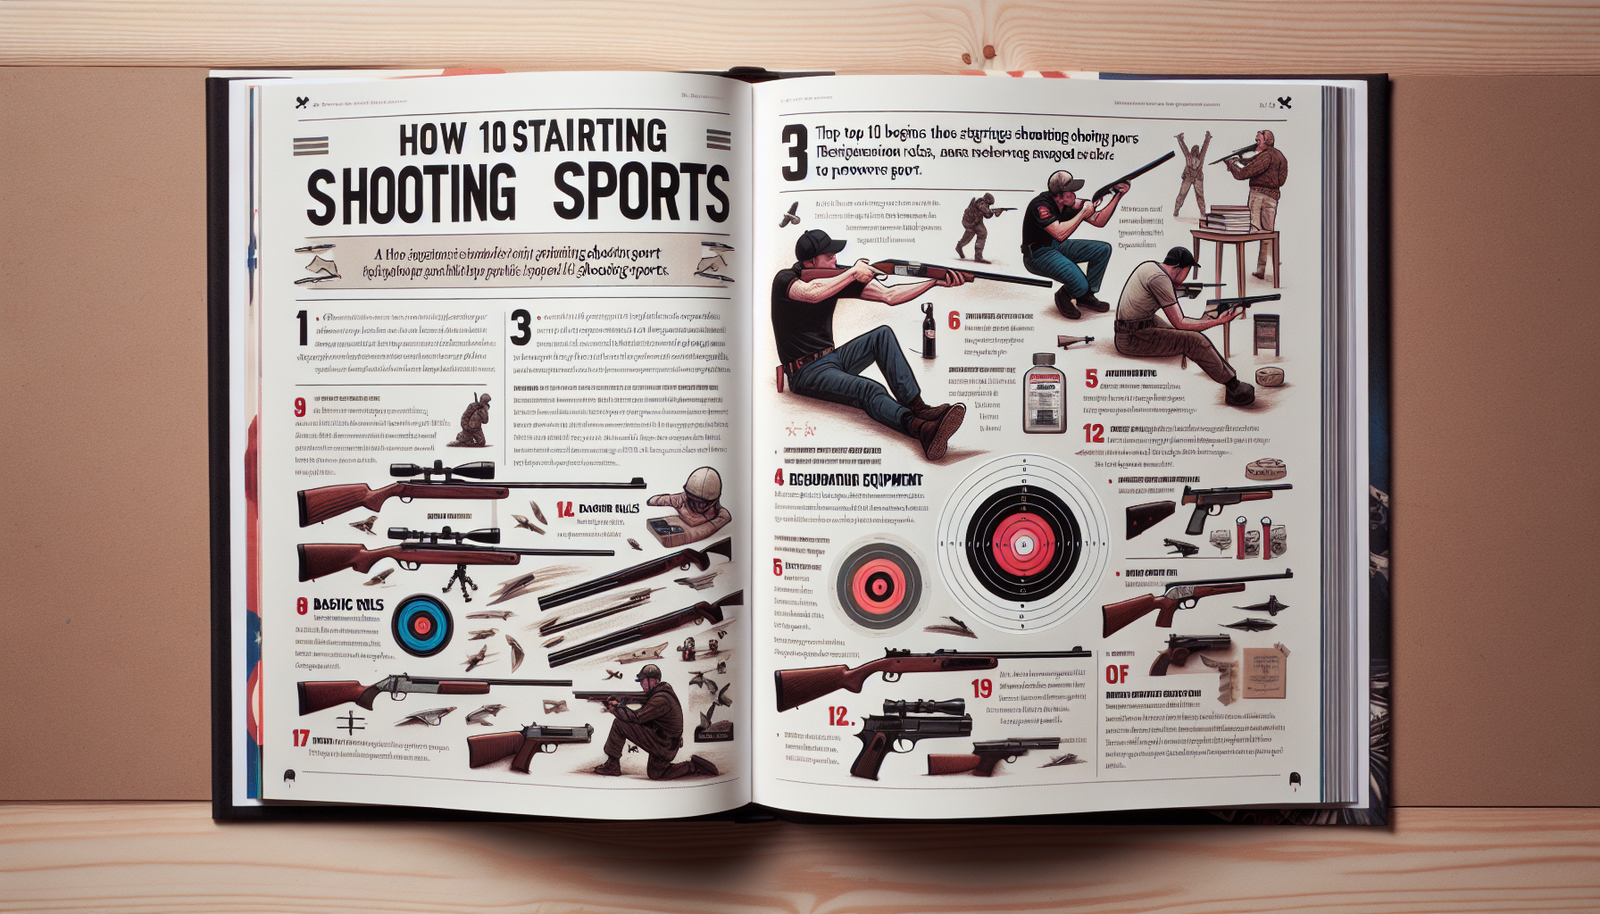 Top 10 Shooting Sports For Beginners